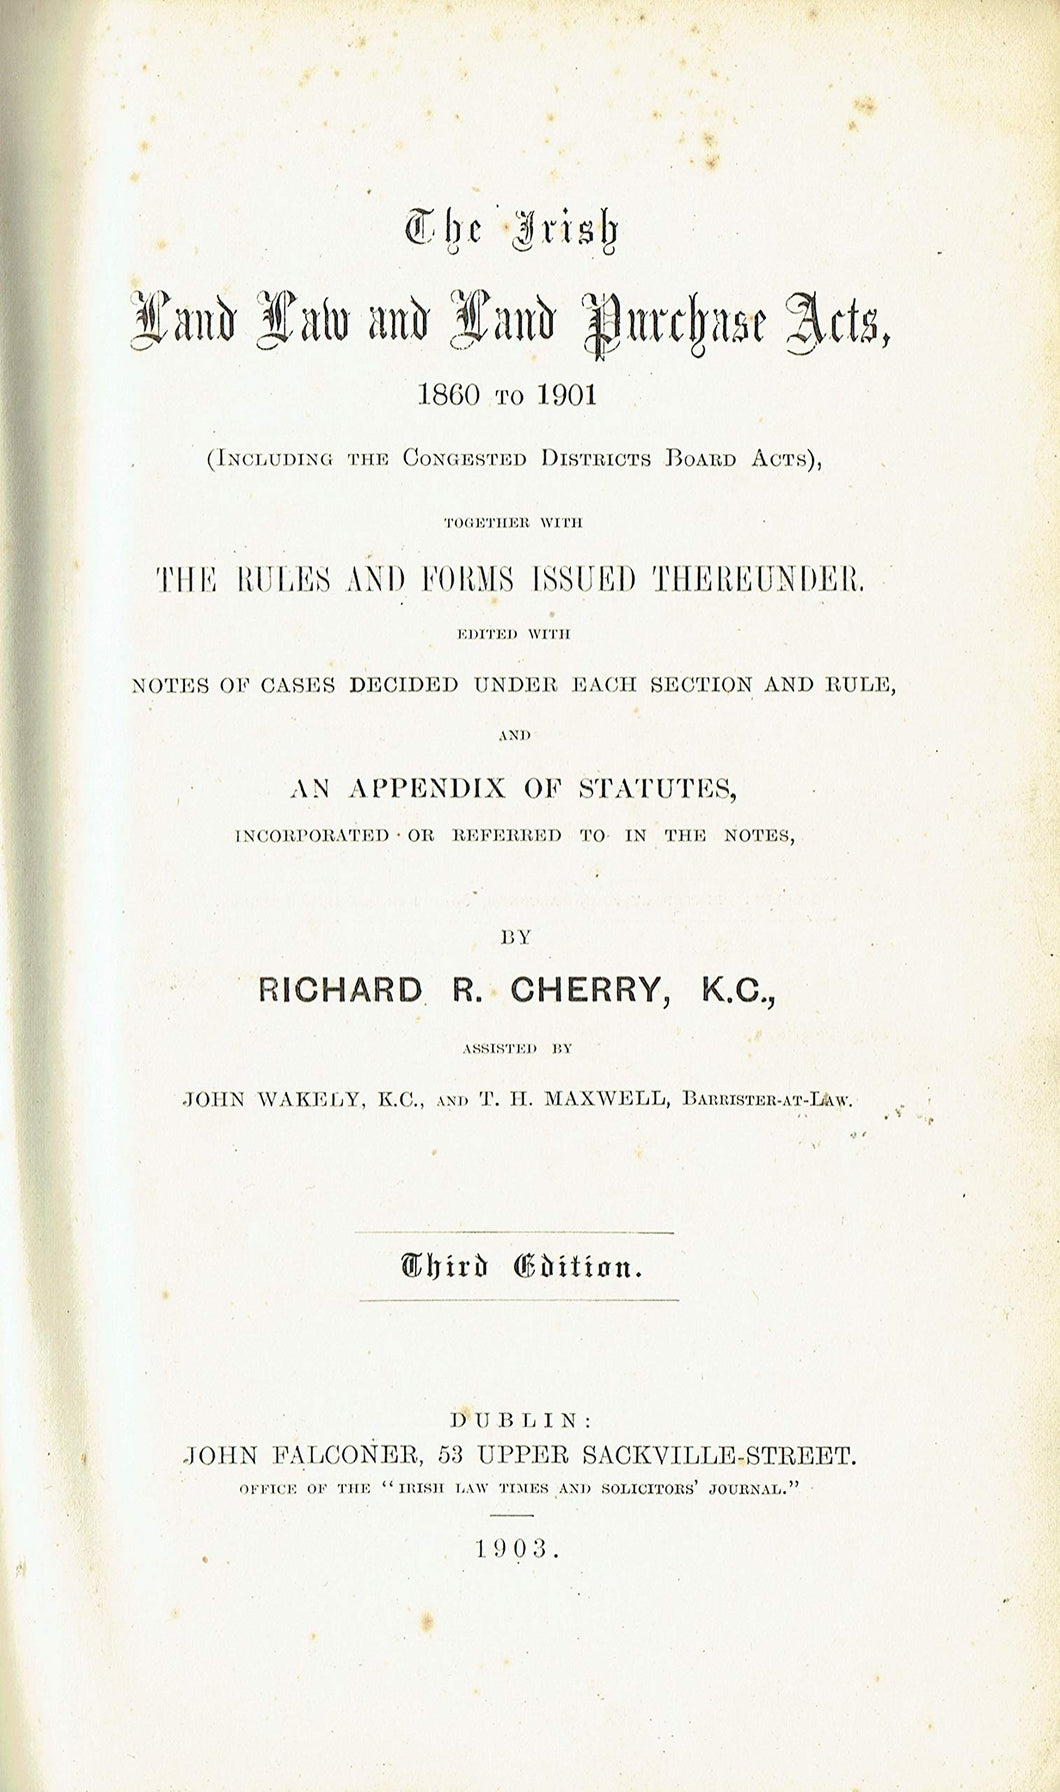 The Irish Land Law and Land Purchase Acts, 1860 to 1901 (including the Congested Districts Board Acts), together with the rules and forms issued therunder. Edited with notes of cases decided under each section and rule, and an appendix of statutes, incorp